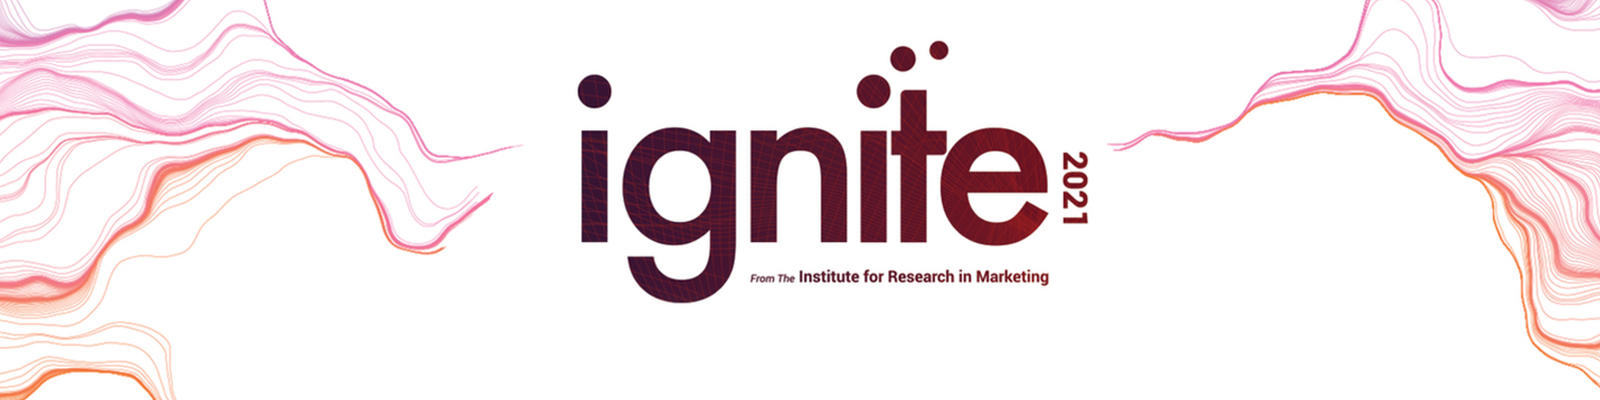 Ignite 2021 is a virtual event that will illuminate and inspire marketing professionals who are hungry to lead in this new era. 